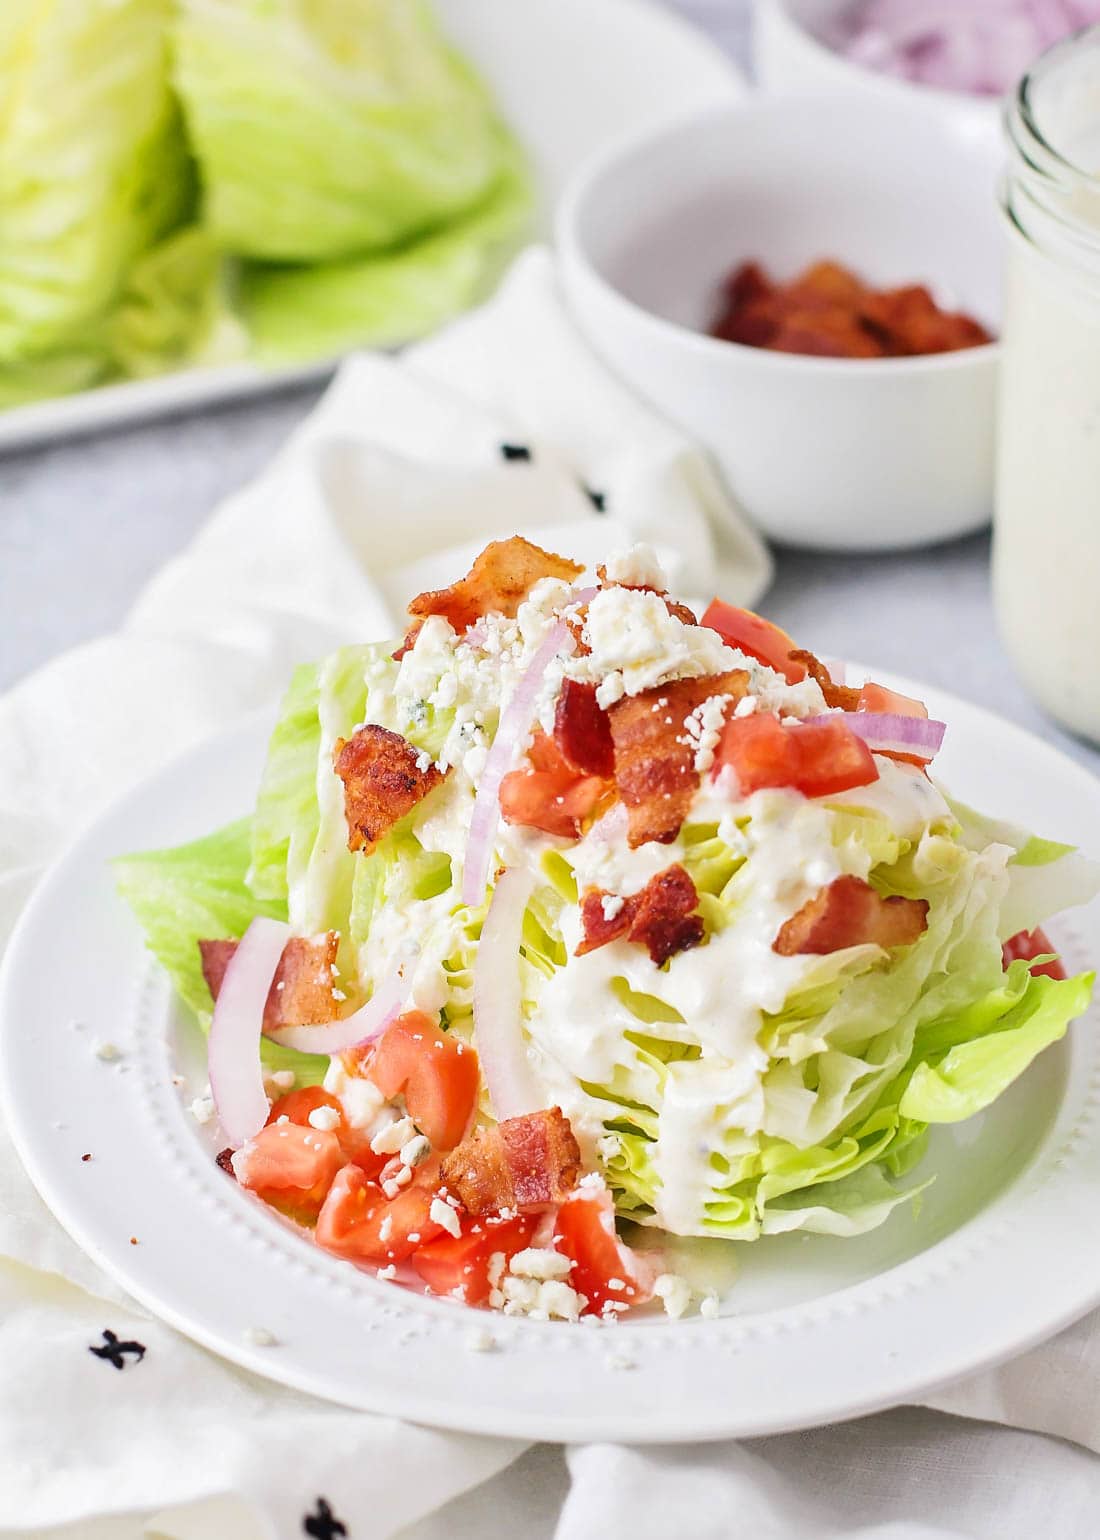 Wedge salad served on a white plate